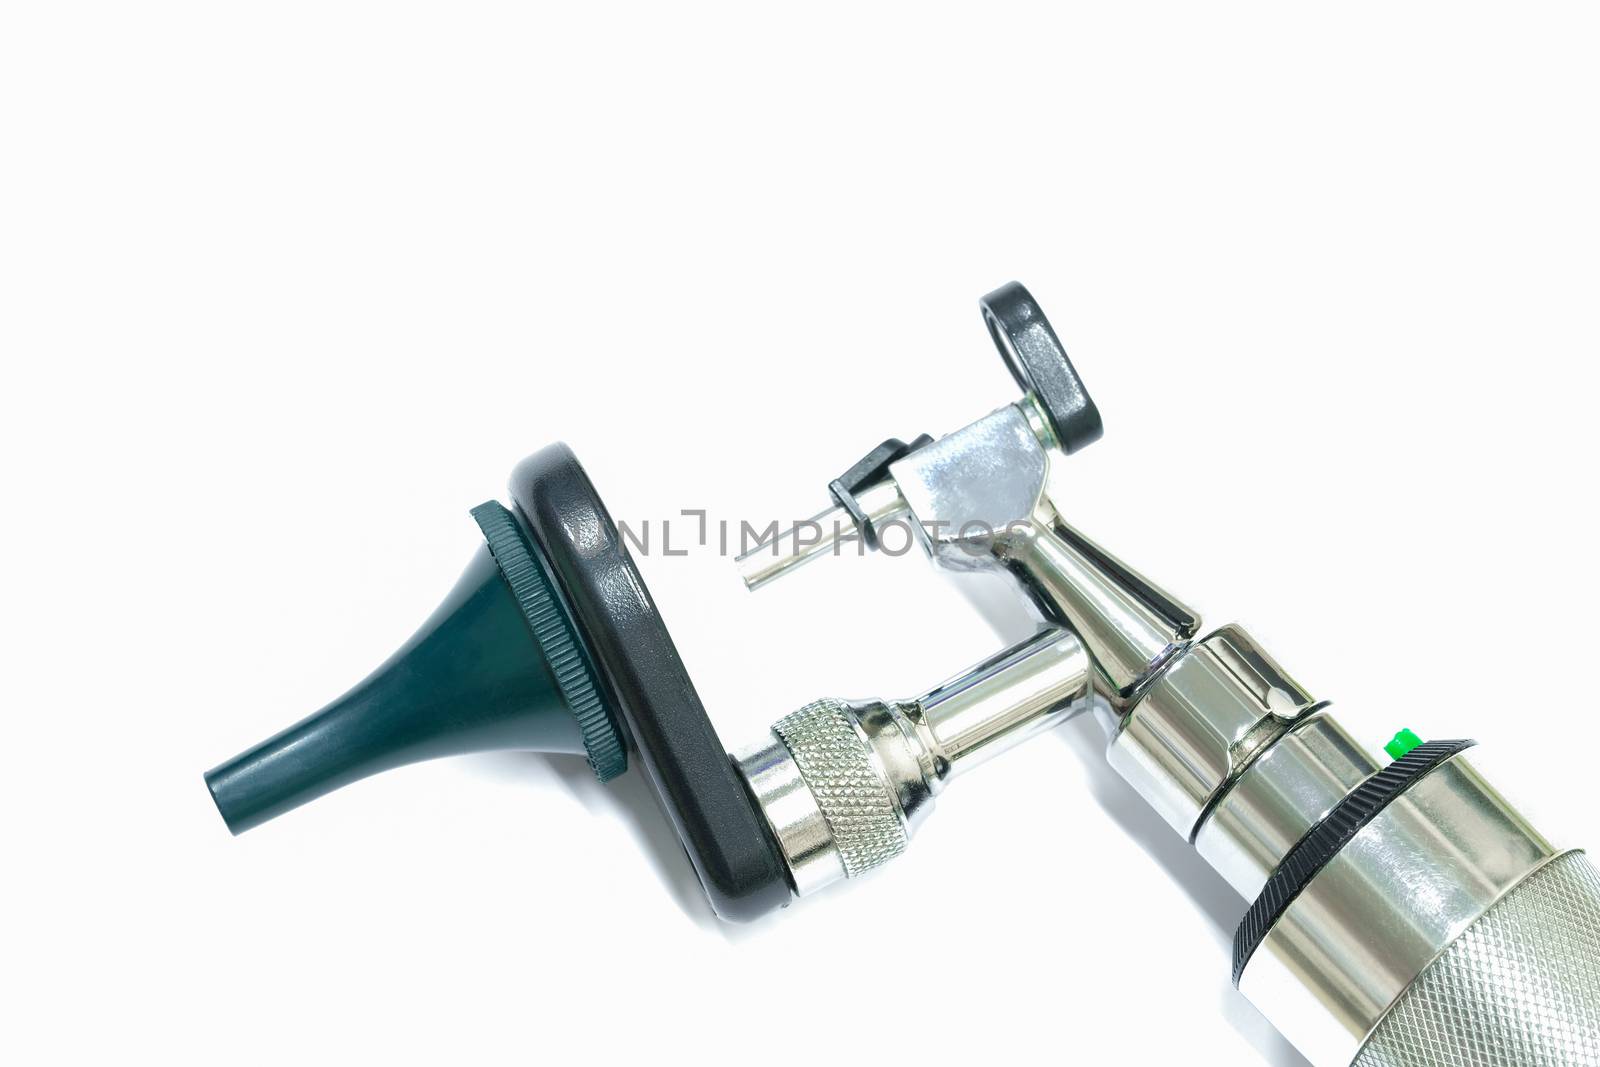 a stainless steel otoscope, an important tool used by an otolaryngologist, or an ear doctor, to examime a patient's ear, isolated on white background, closeup view